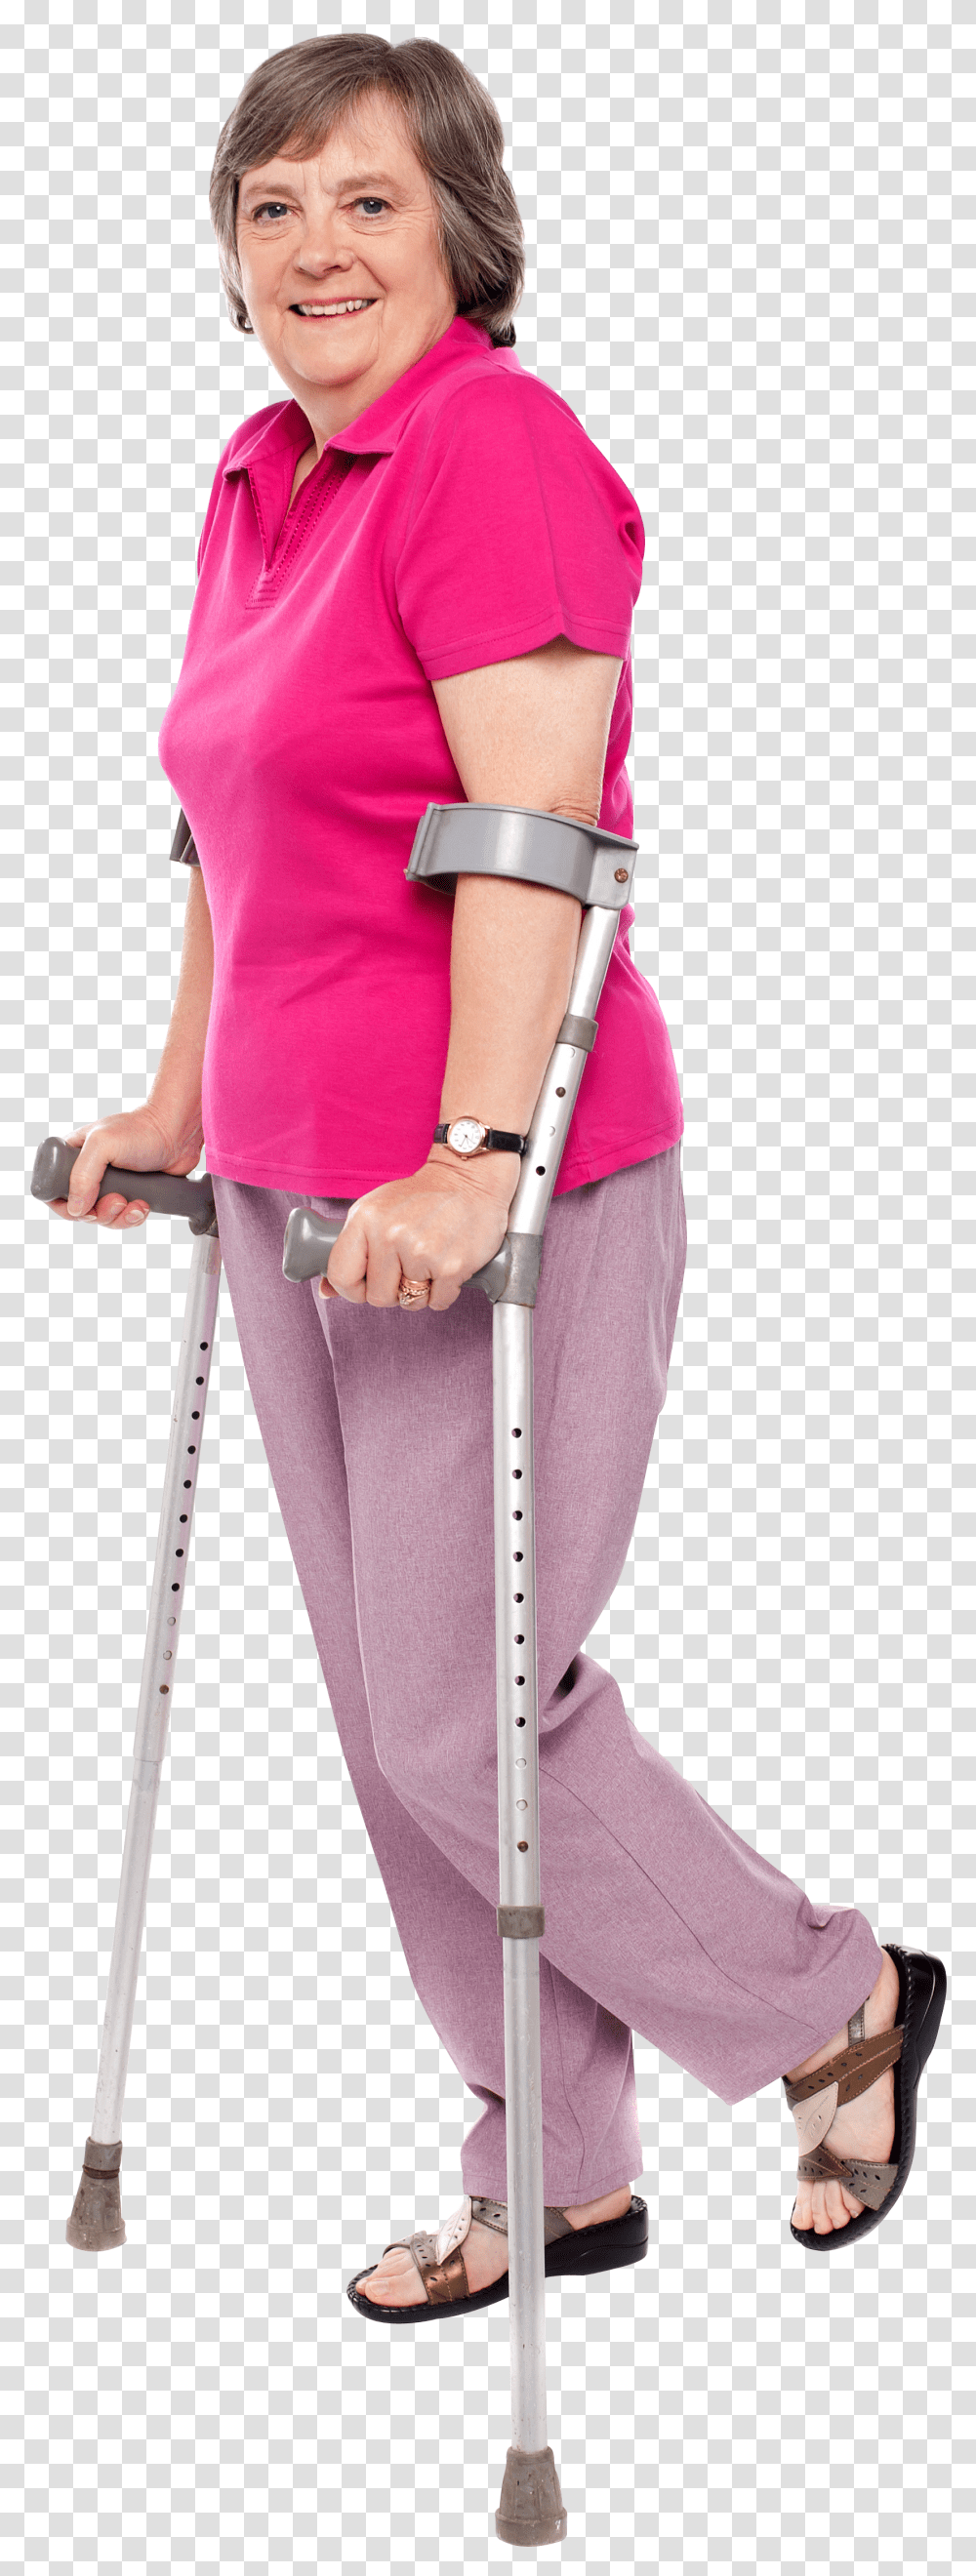 Grandmother Woman Walking With Crutches Transparent Png